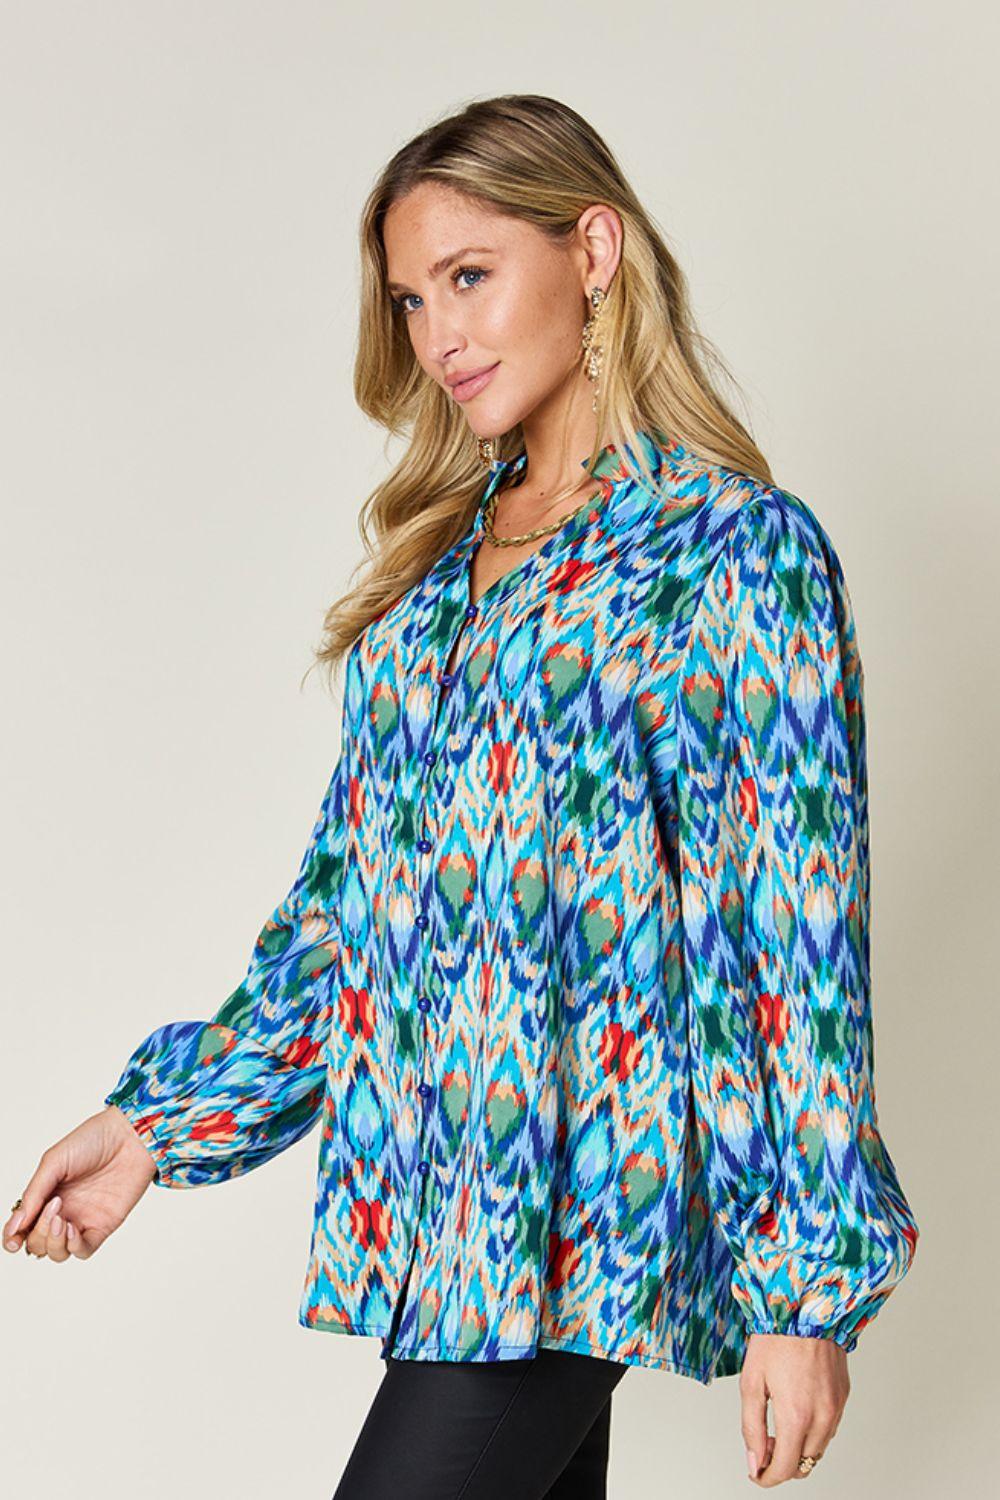 Double Take Full Size Printed Balloon Sleeve Blouse Shirts & Tops